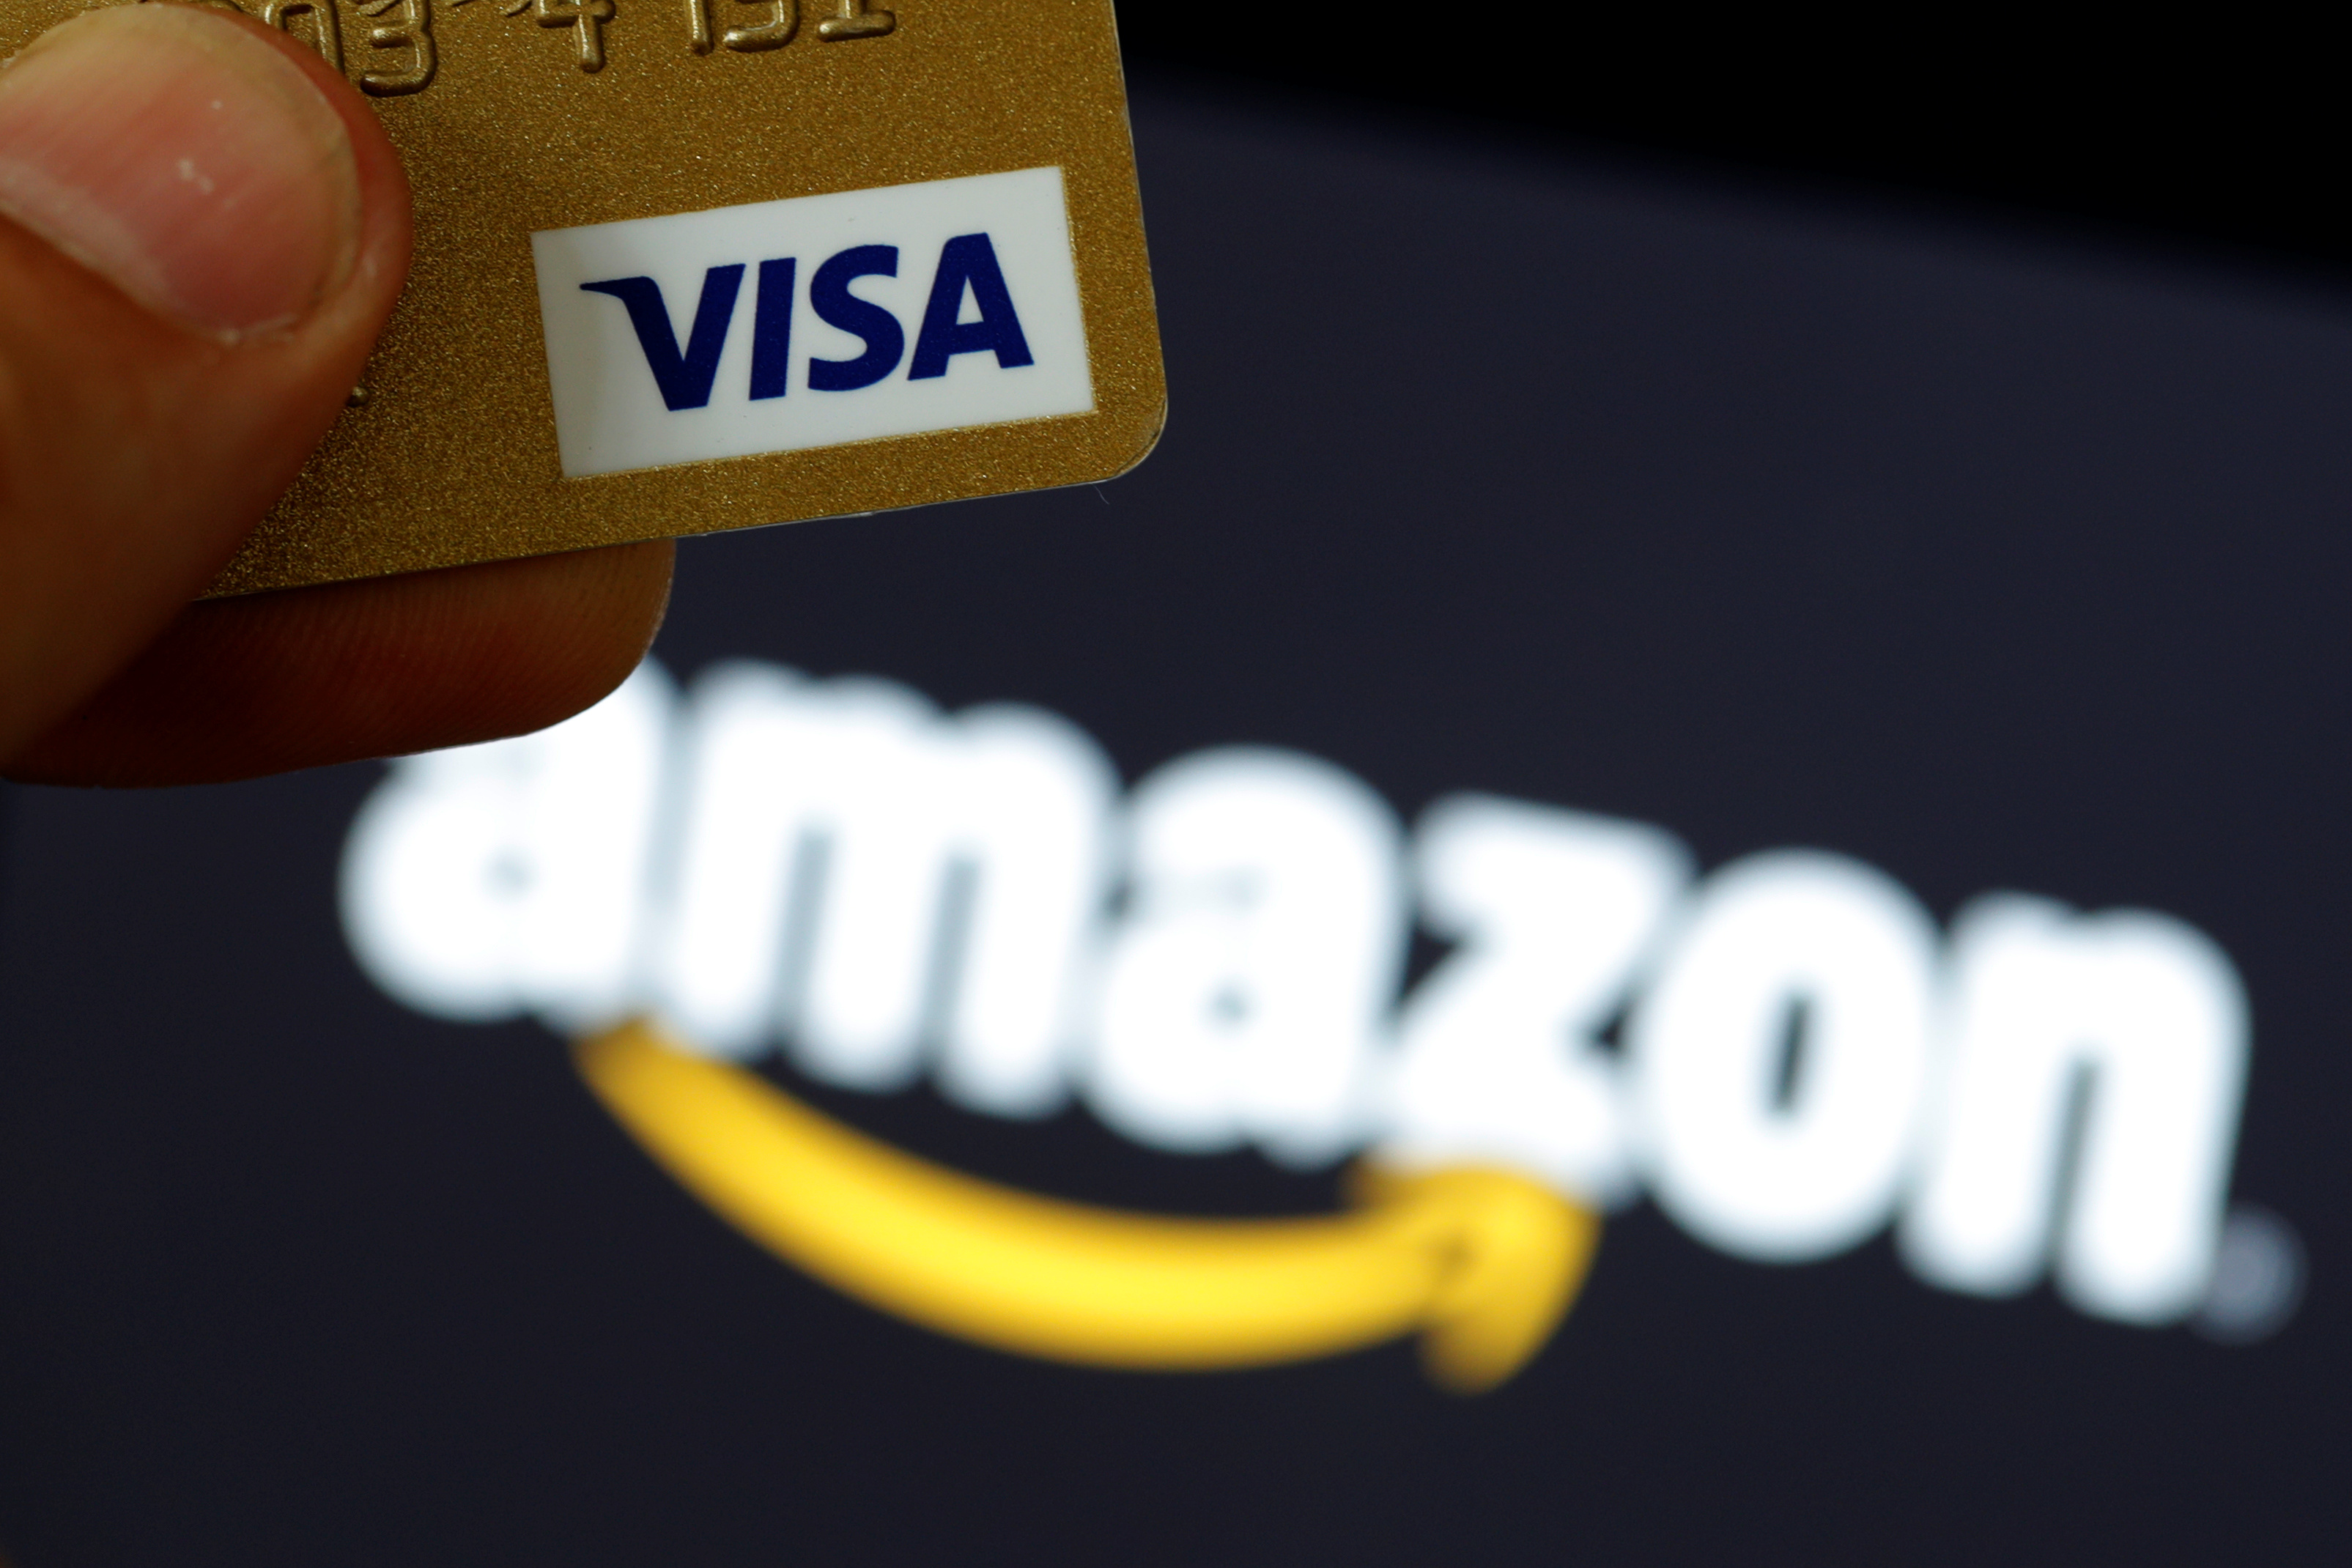 A visa credit card is held in front of an Amazon logo in this picture illustration